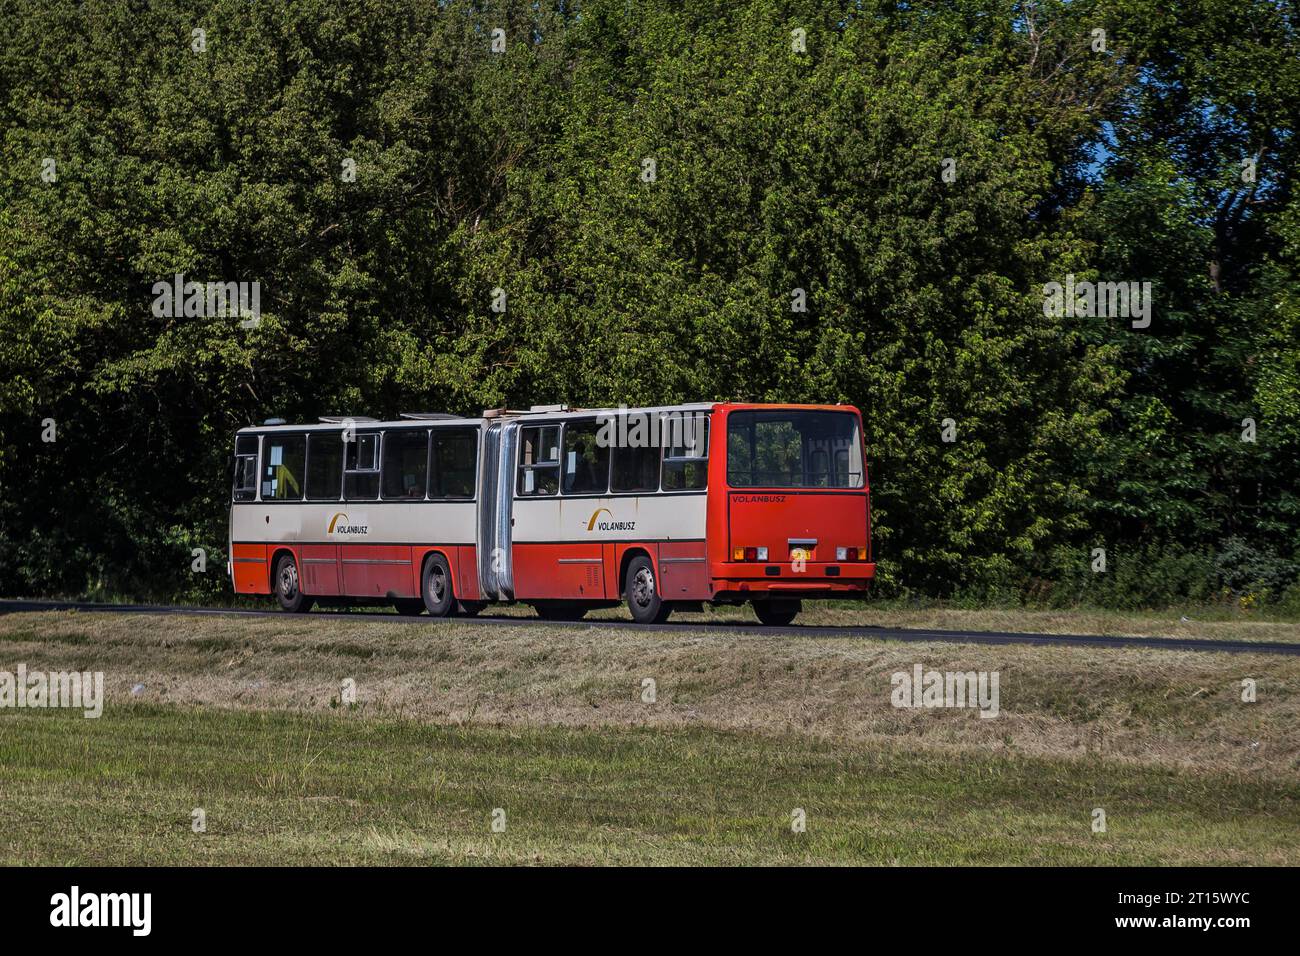 30.07.2020. Hungary, road between Dorog and Esztergom. Majestic view of the rear of Ikarus 280. Stock Photo